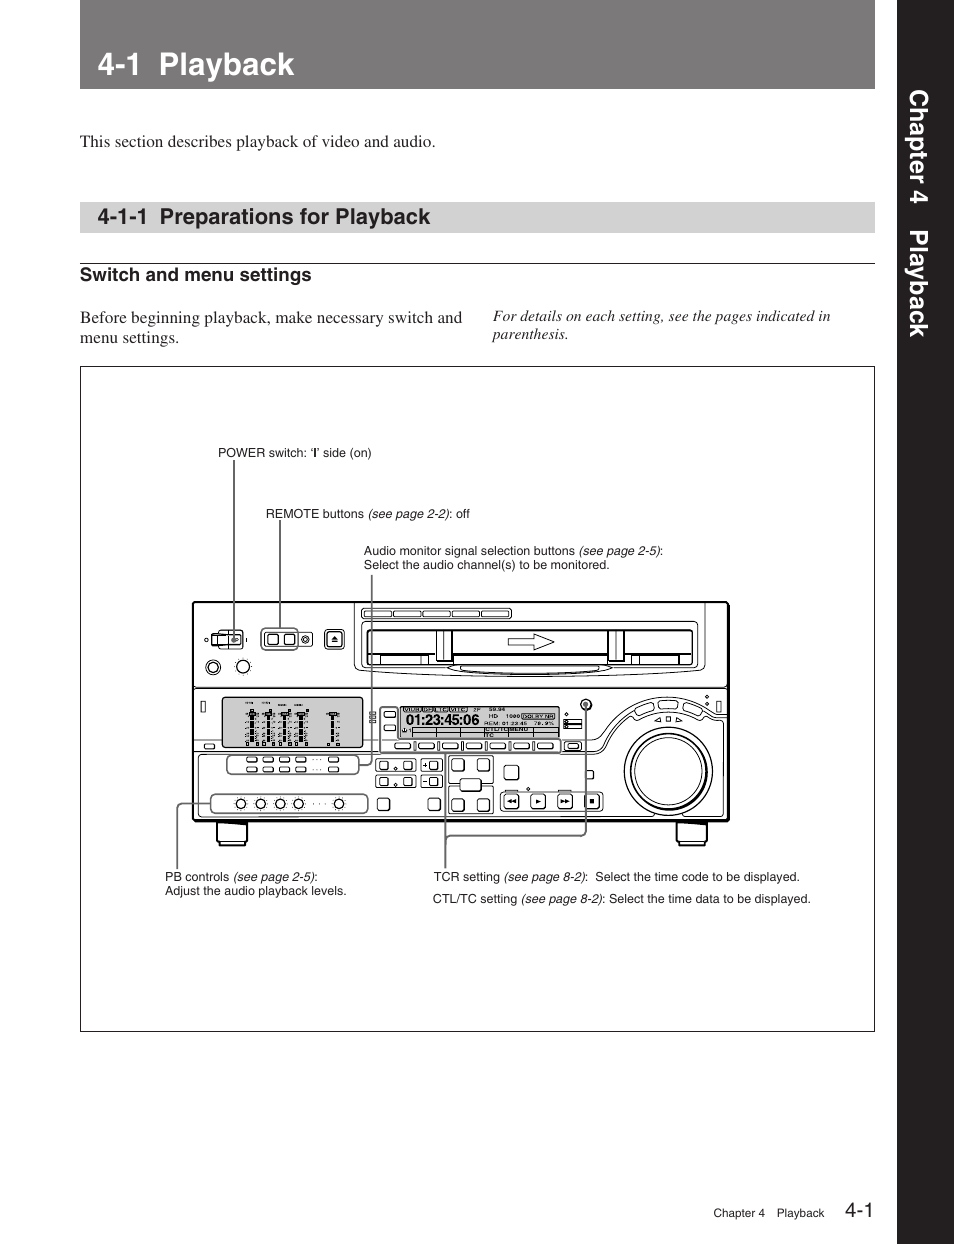 Chapter 4 playback, 1 playback, 1-1 preparations for playback | Chapter 4 pla ybac k, Switch and menu settings | Sony HDW-M2100 User Manual | Page 34 / 115